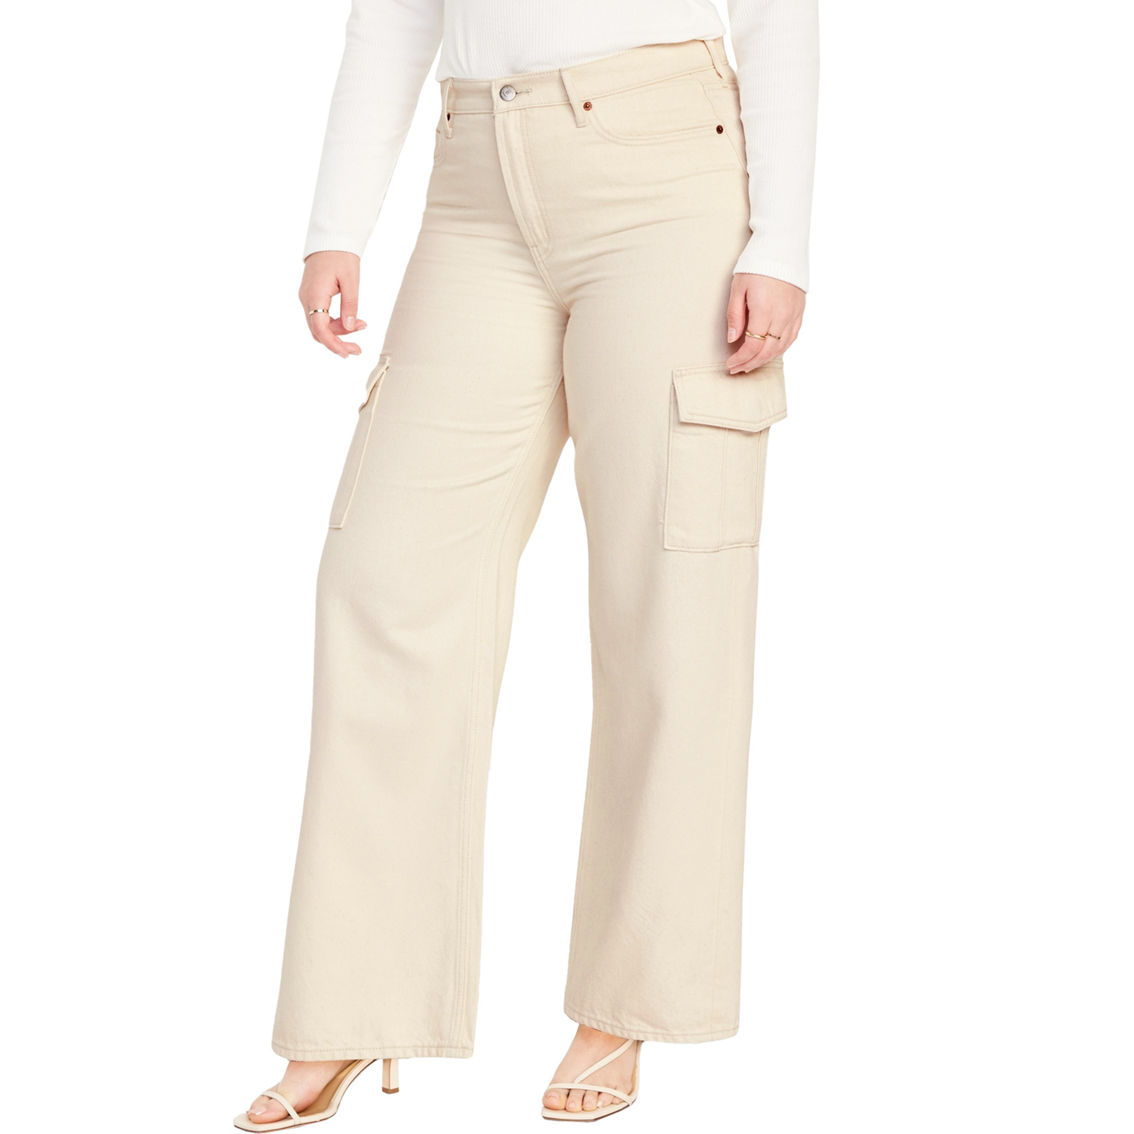 Old Navy Drapey Cargo Wide Leg Pants - Image 2 of 4